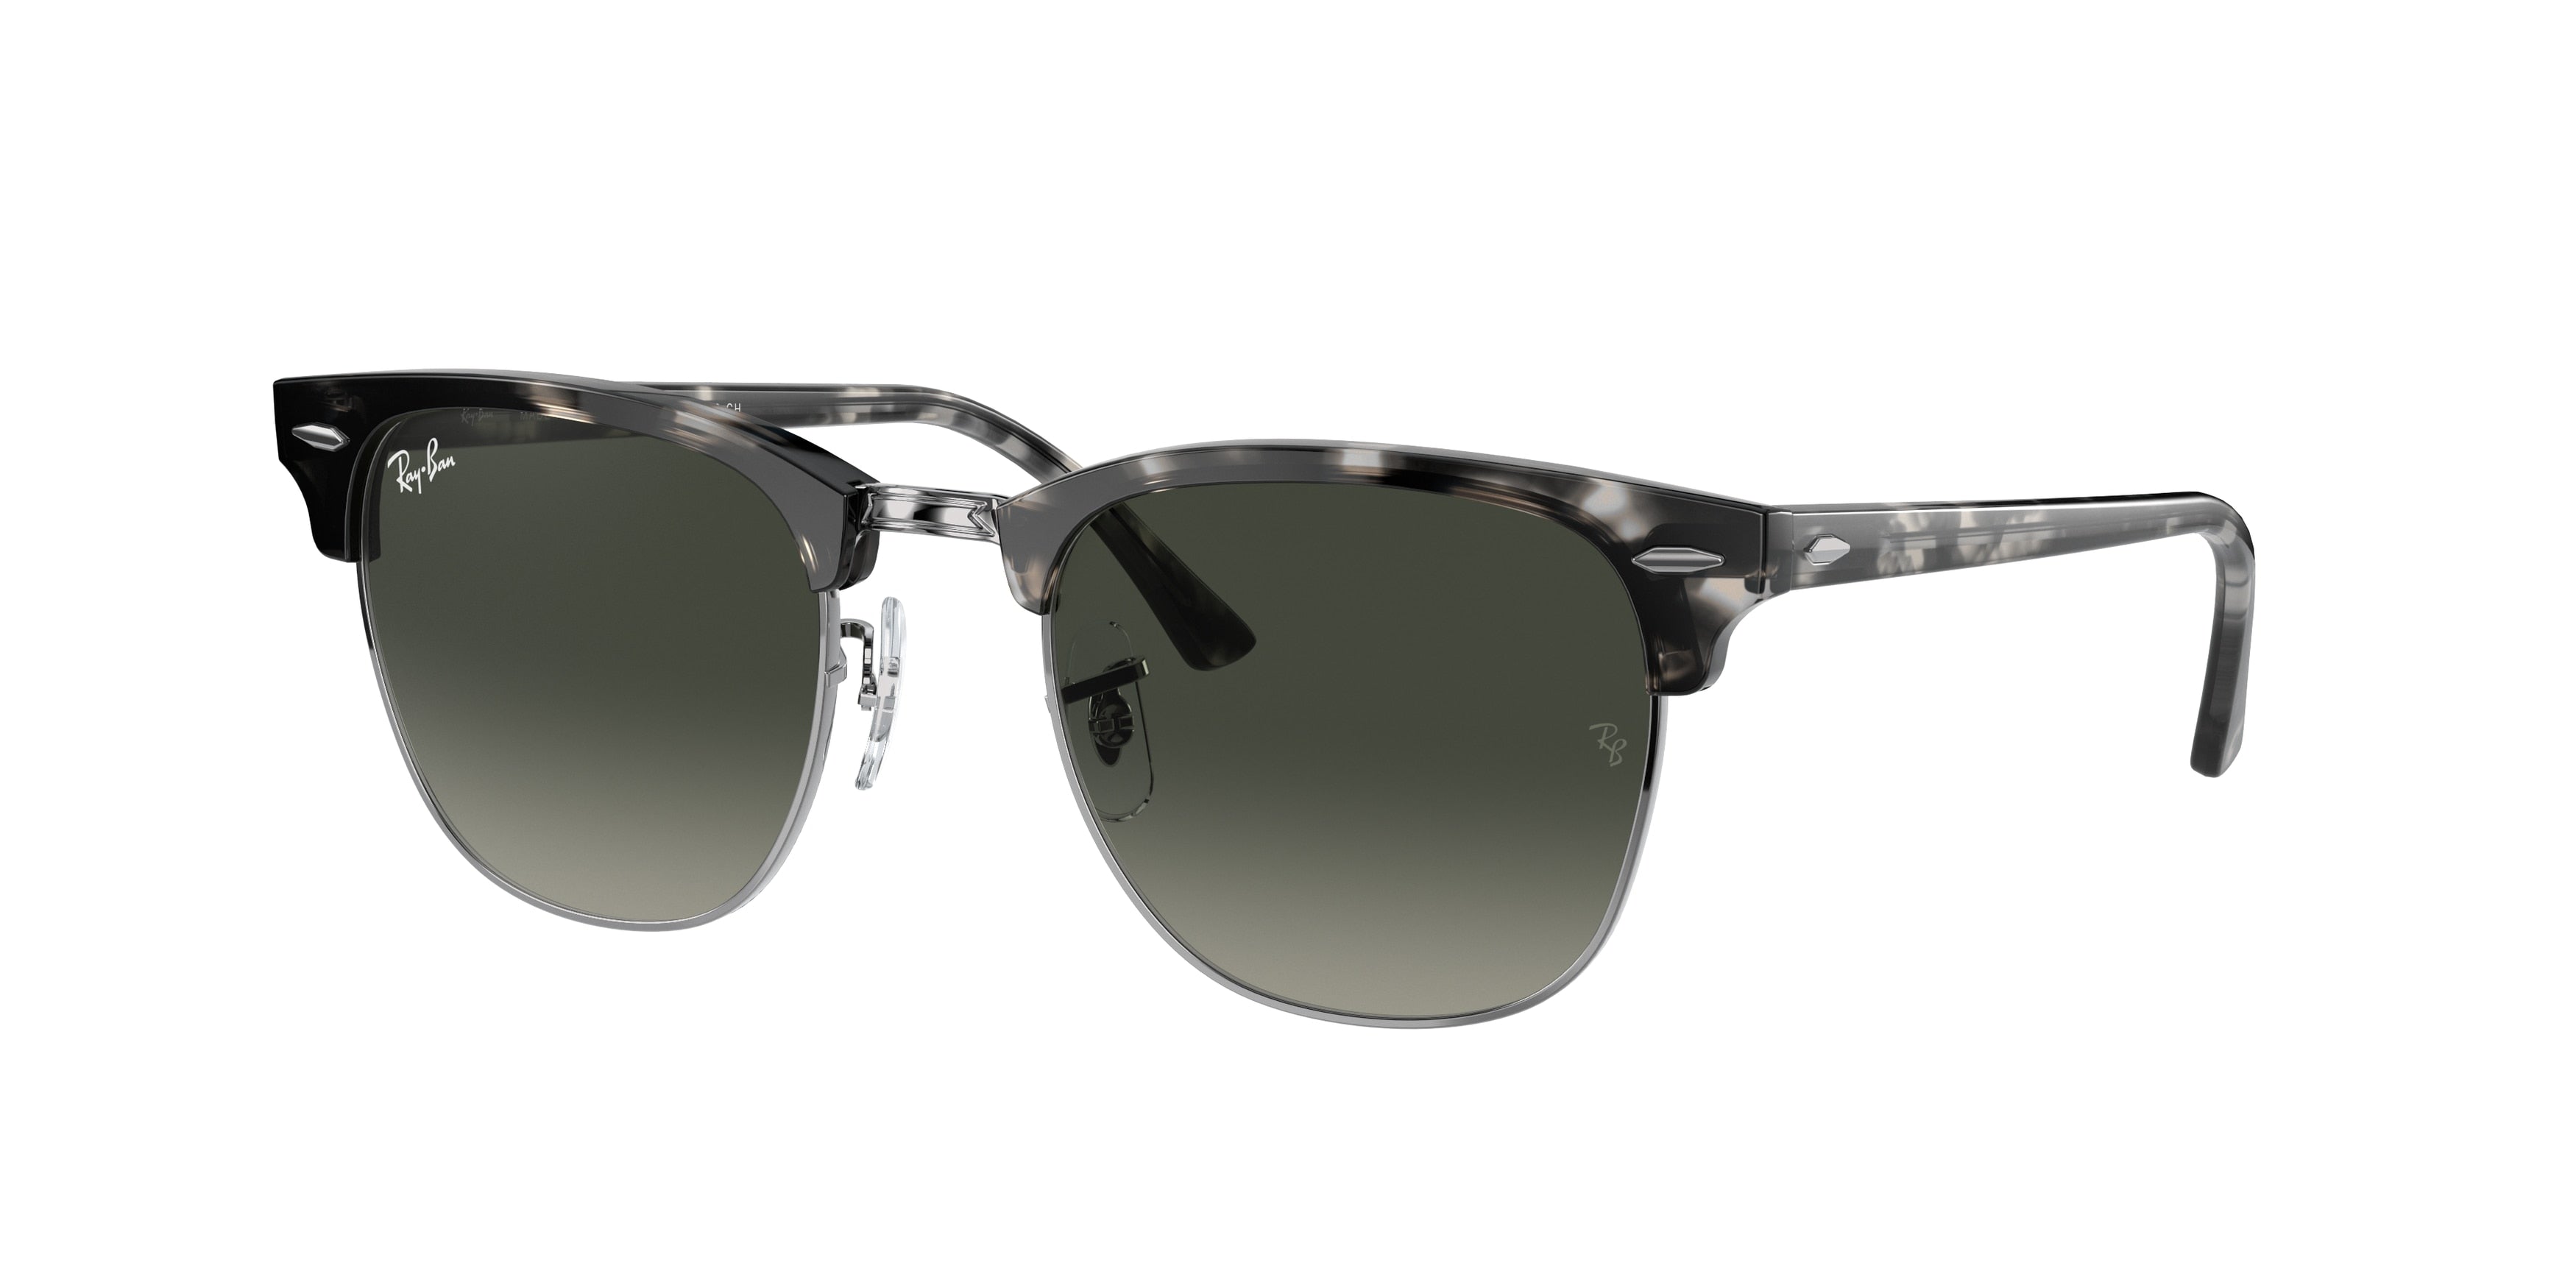 Ray-Ban CLUBMASTER RB3016 Square Sunglasses  133671-Grey Havana 50-145-21 - Color Map Grey